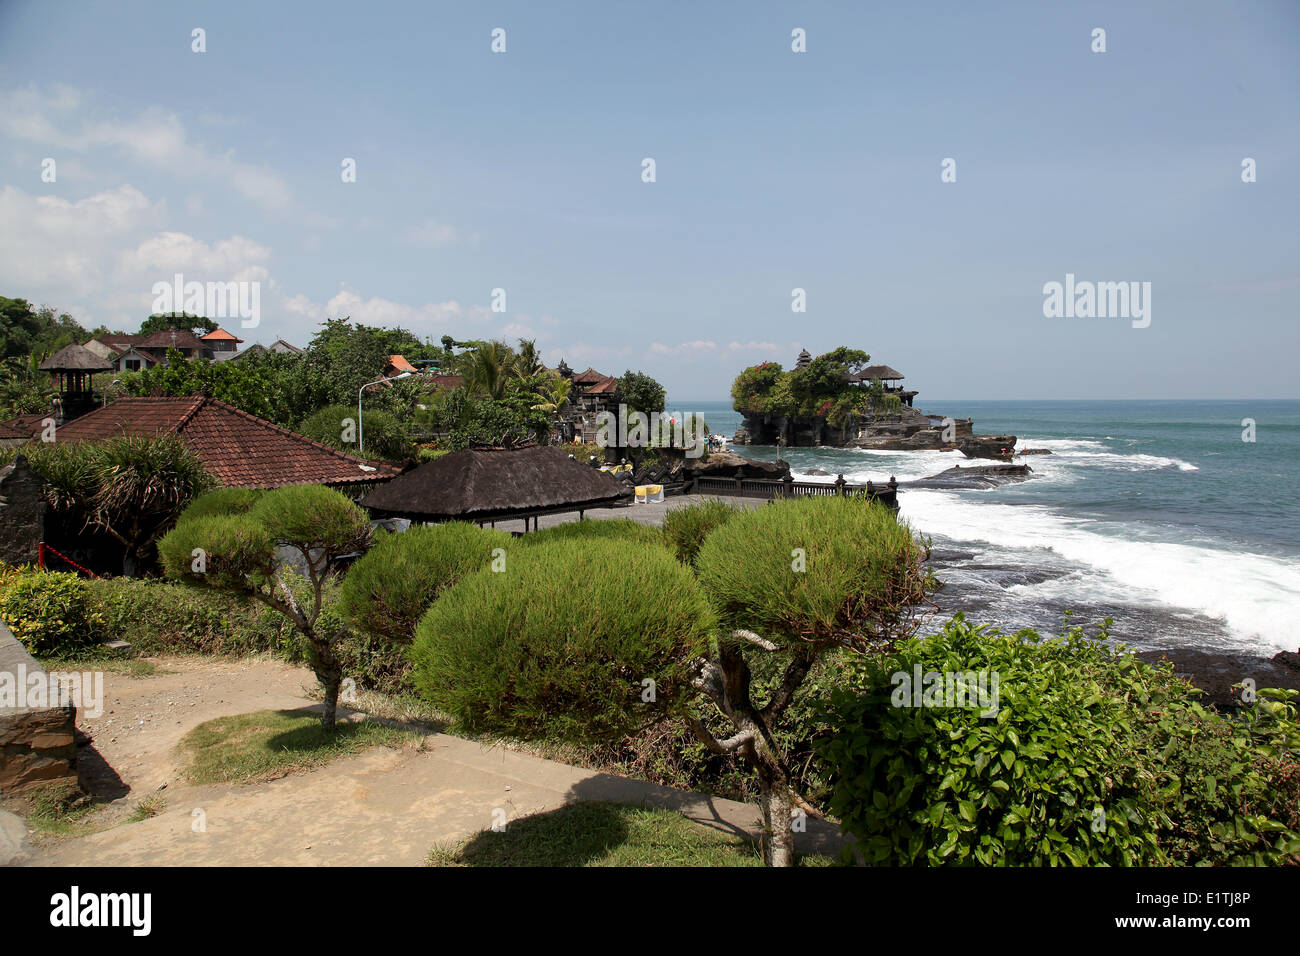 The Tanah Lot sea temple was built on top of a huge rock surrounded by the sea, around 500 years ago. The temple is one of 7 sea temples in Bali and it's considered as one of the most beautiful spots on the west cost of Bali, Indonesia, May 2, 2014. (CTK Stock Photo